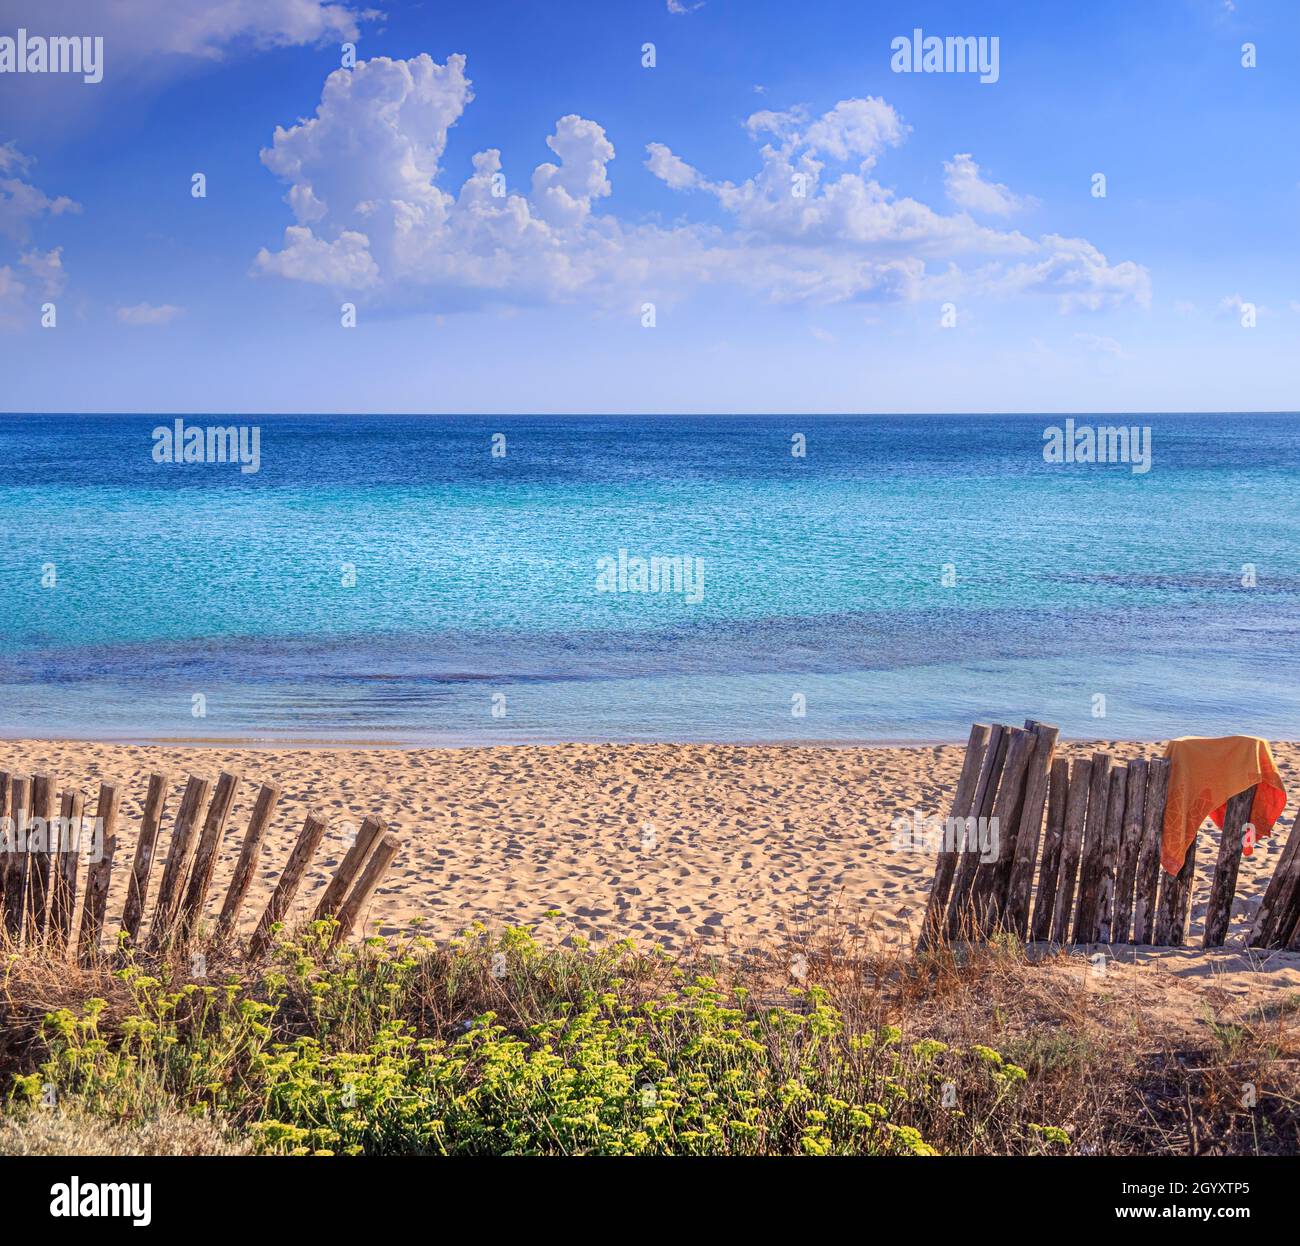 Summertime: fence on the beach in Puglia, Italy: the sandy beach of San Pietro in Bevagna is a natural oasis in front of the blue Ionian sea. Stock Photo